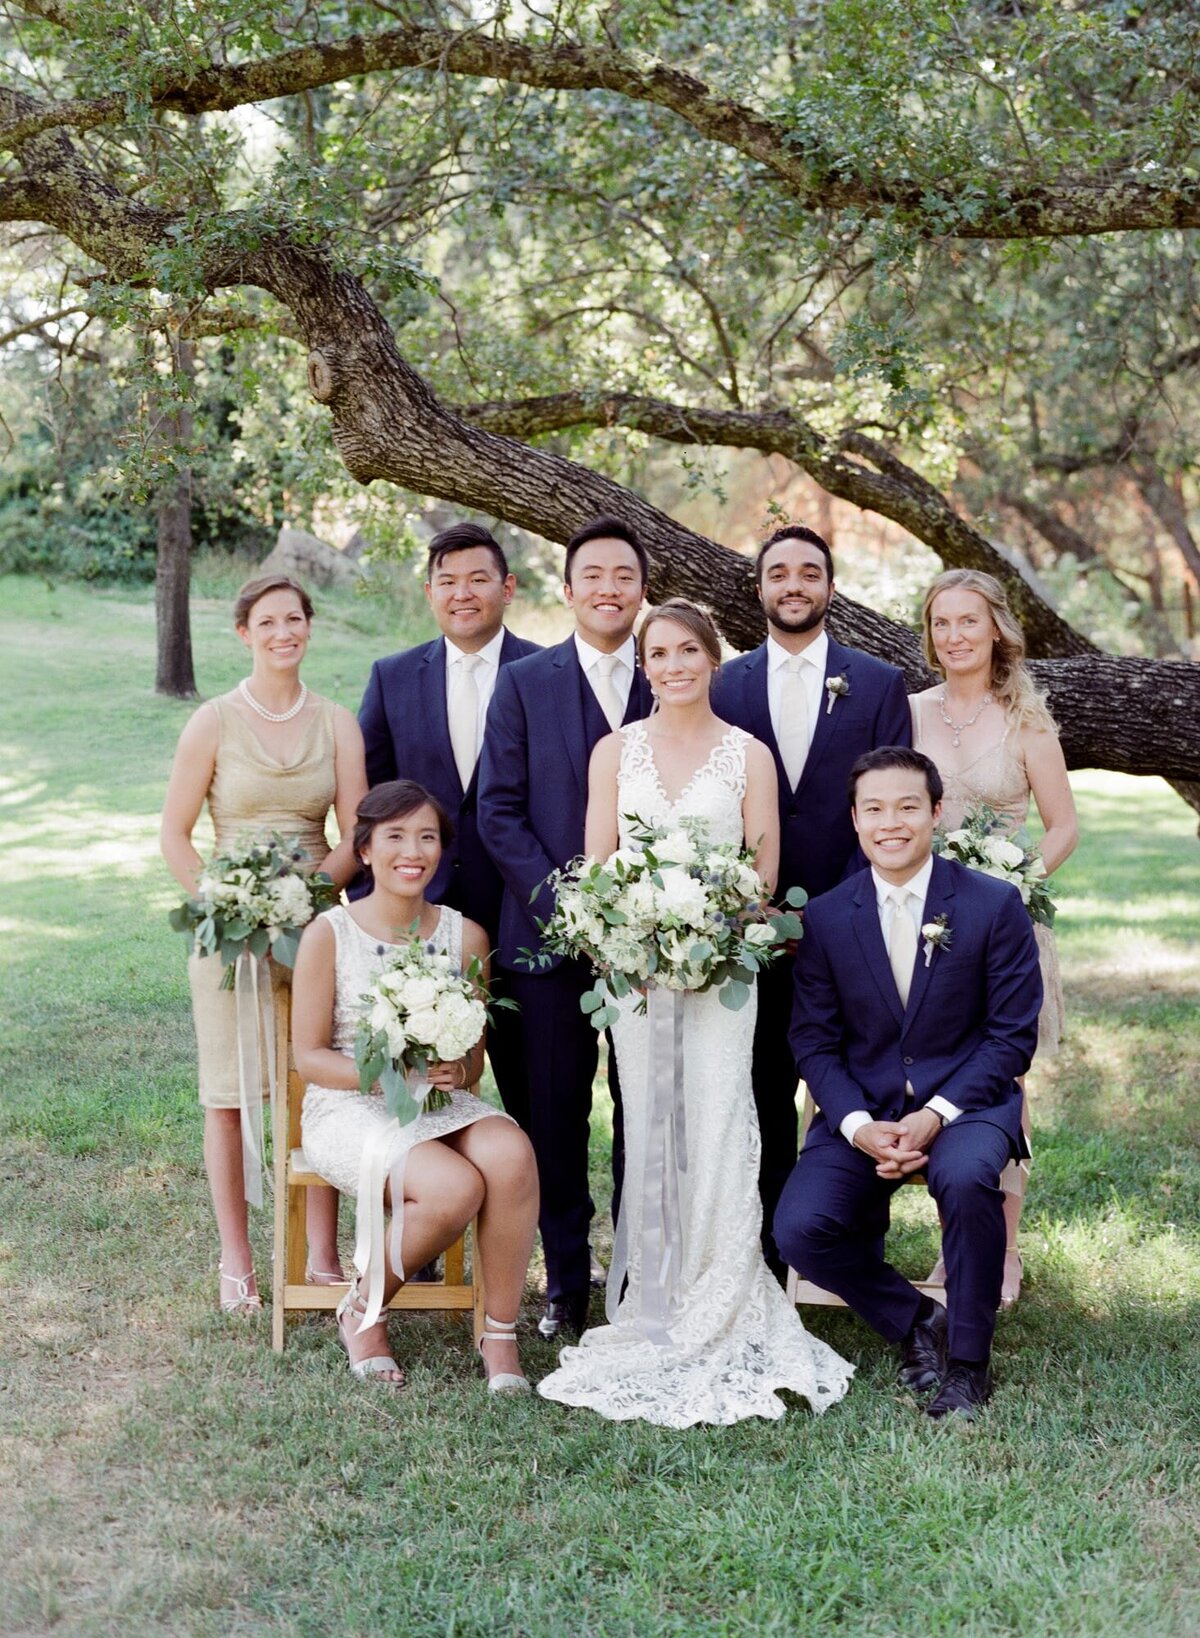 Wedding photographer Robin Jolin captures newly-wed wife and husband with their family members at a ranch wedding.